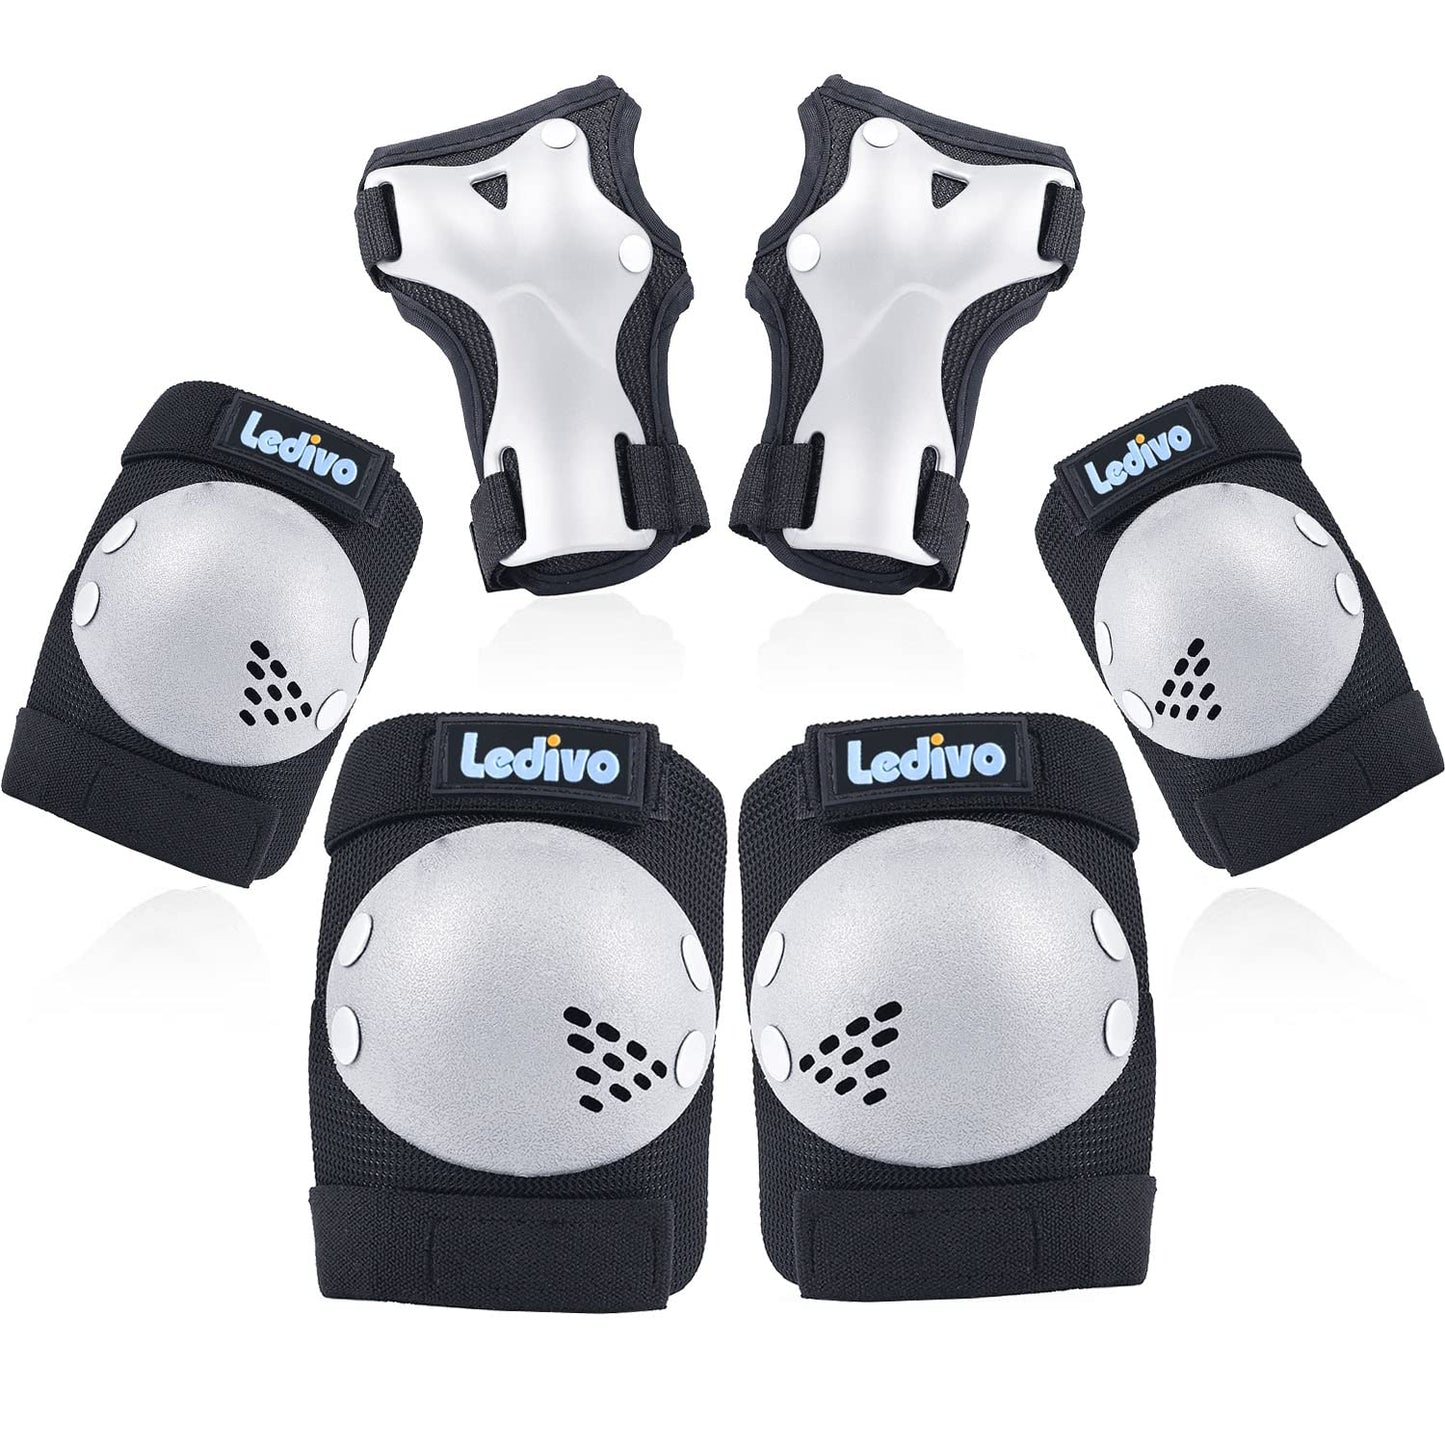 Ledivo Knee Pads Adult/Youth/Kids Elbow Pads Wrist Guards 3 In 1 Protective Gear Set for Multi Sports Skateboarding, Roller Skating Cycling Bike BMX Bicycle Rollerblading Scooter